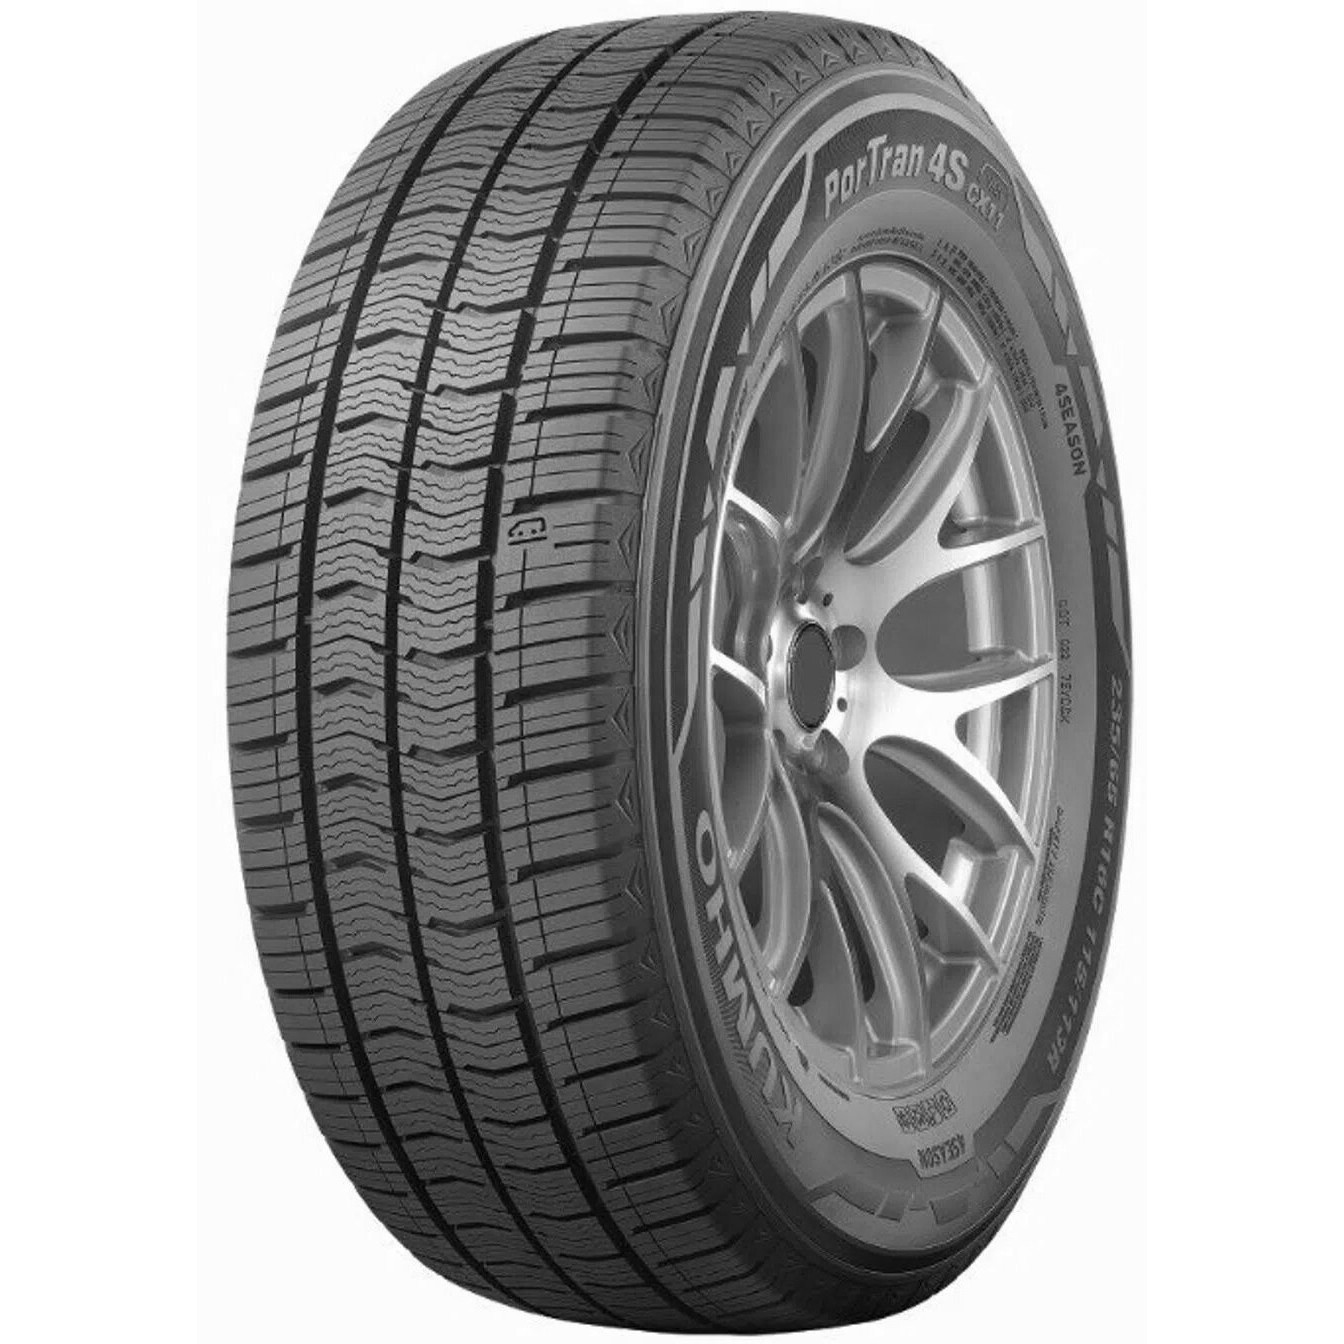 Gomme Nuove Marshal 205/75 R16 110R CX11 M+S pneumatici nuovi All Season